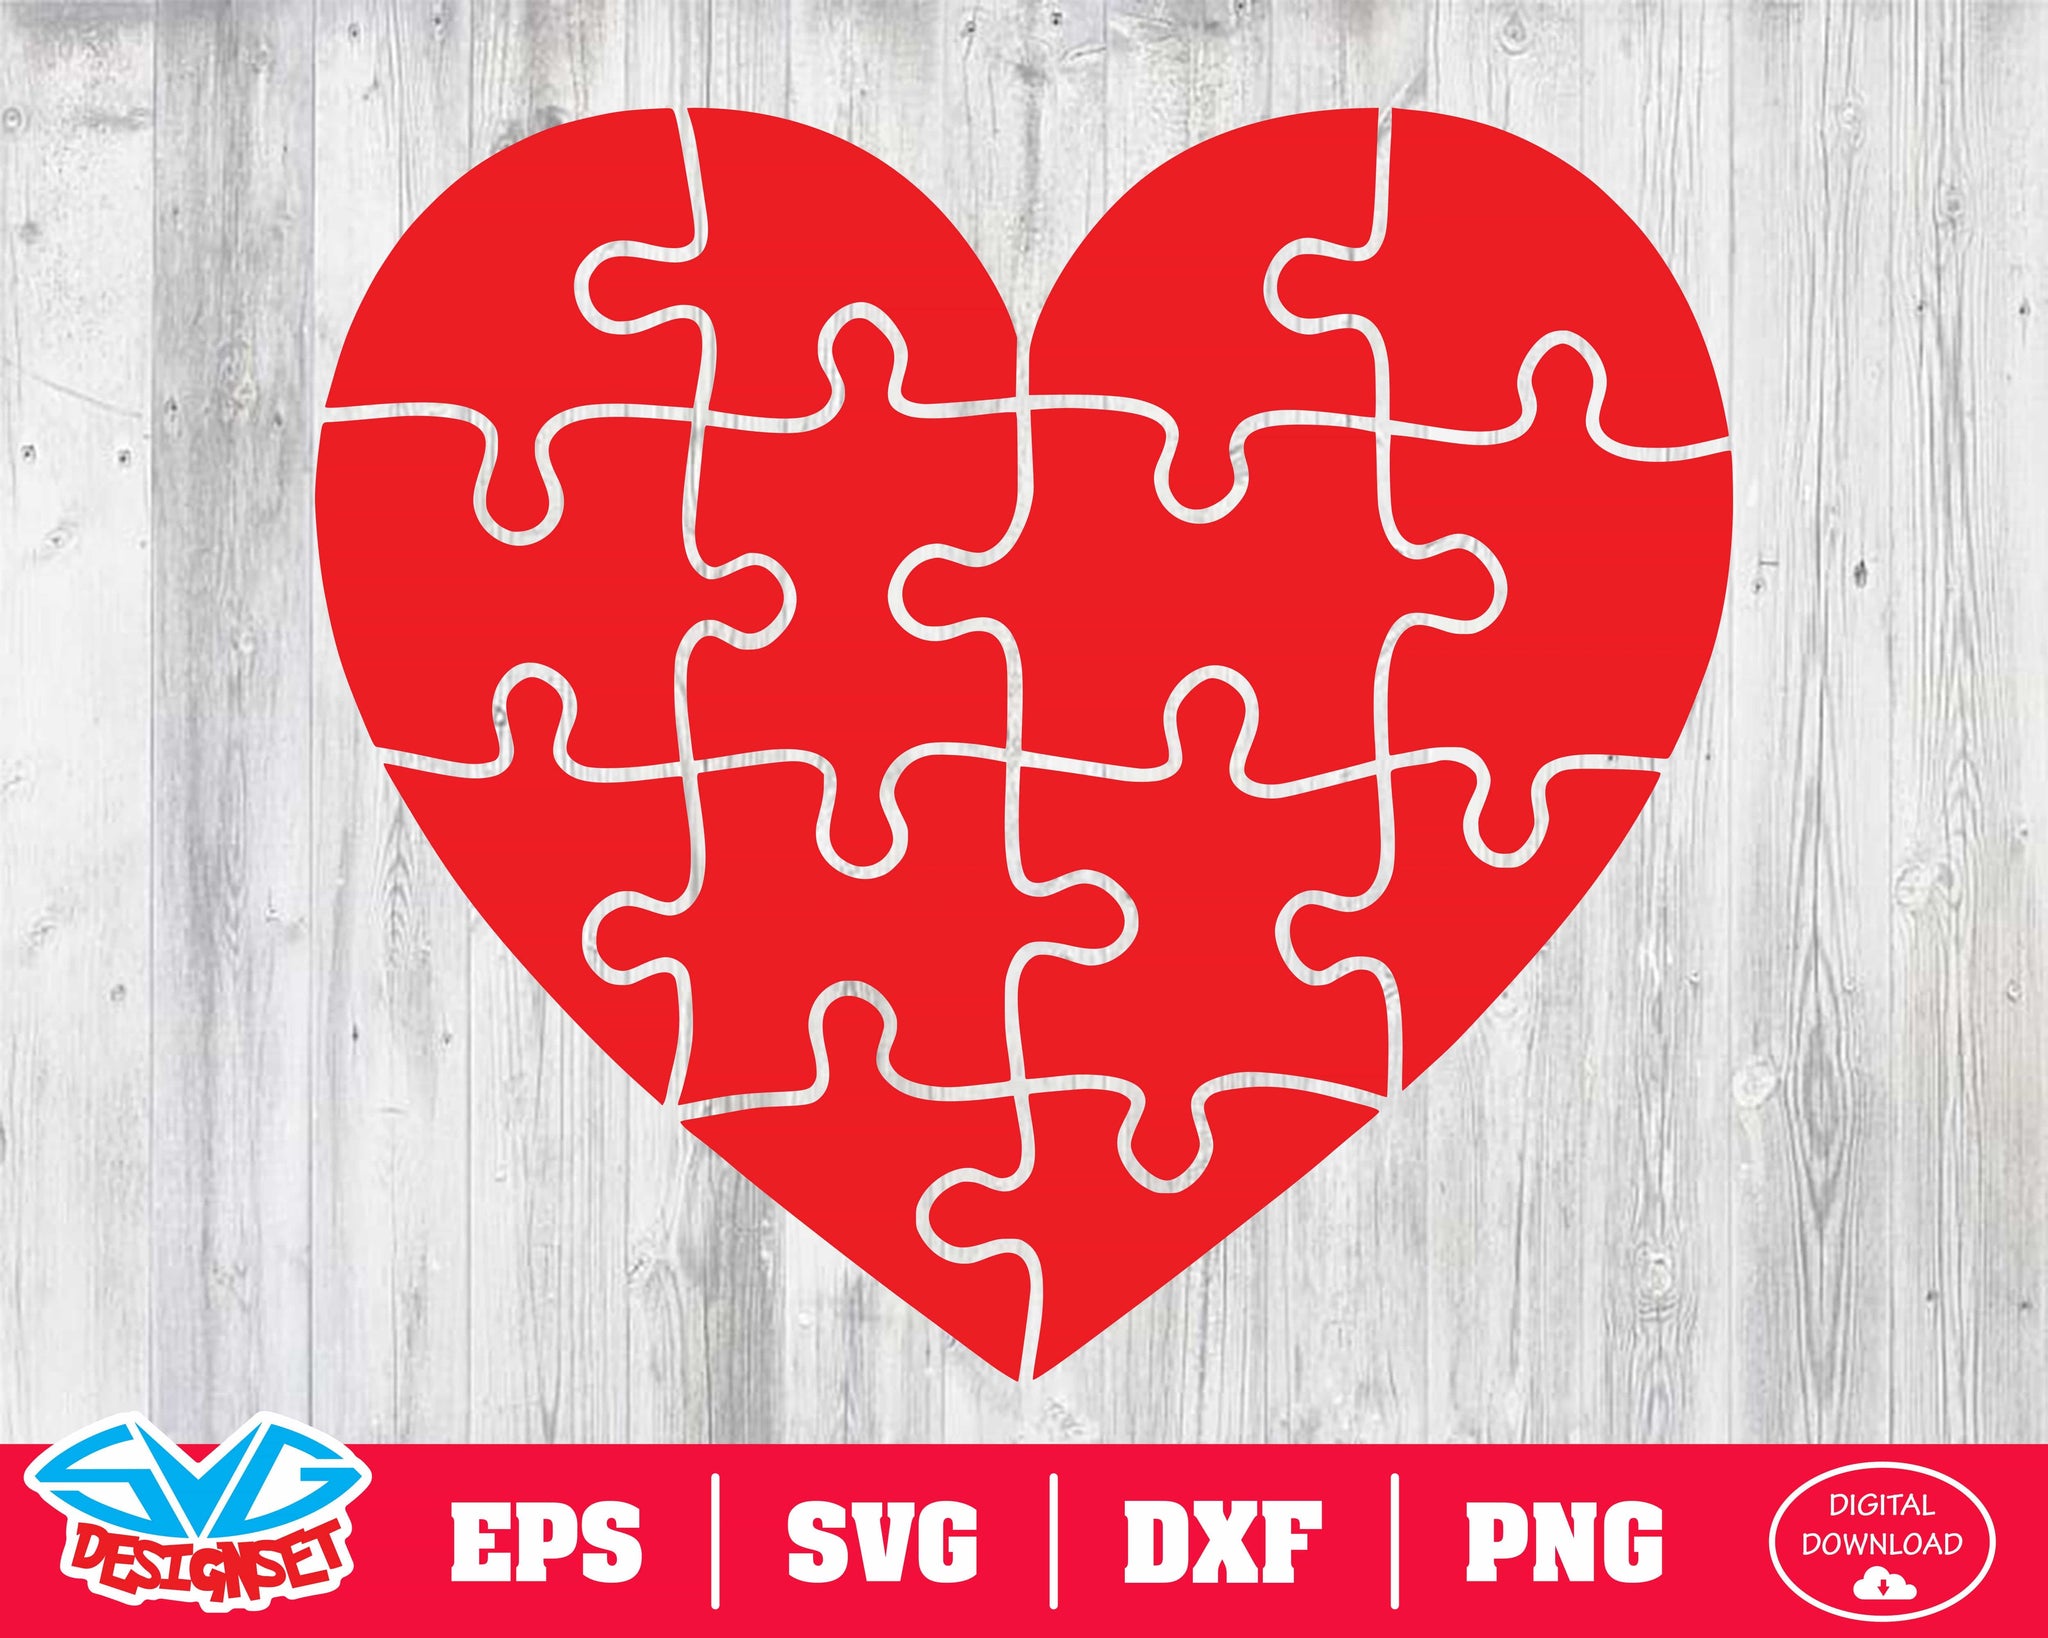 Puzzle heart Svg, Dxf, Eps, Png, Clipart, Silhouette and Cutfiles #2 - SVGDesignSets